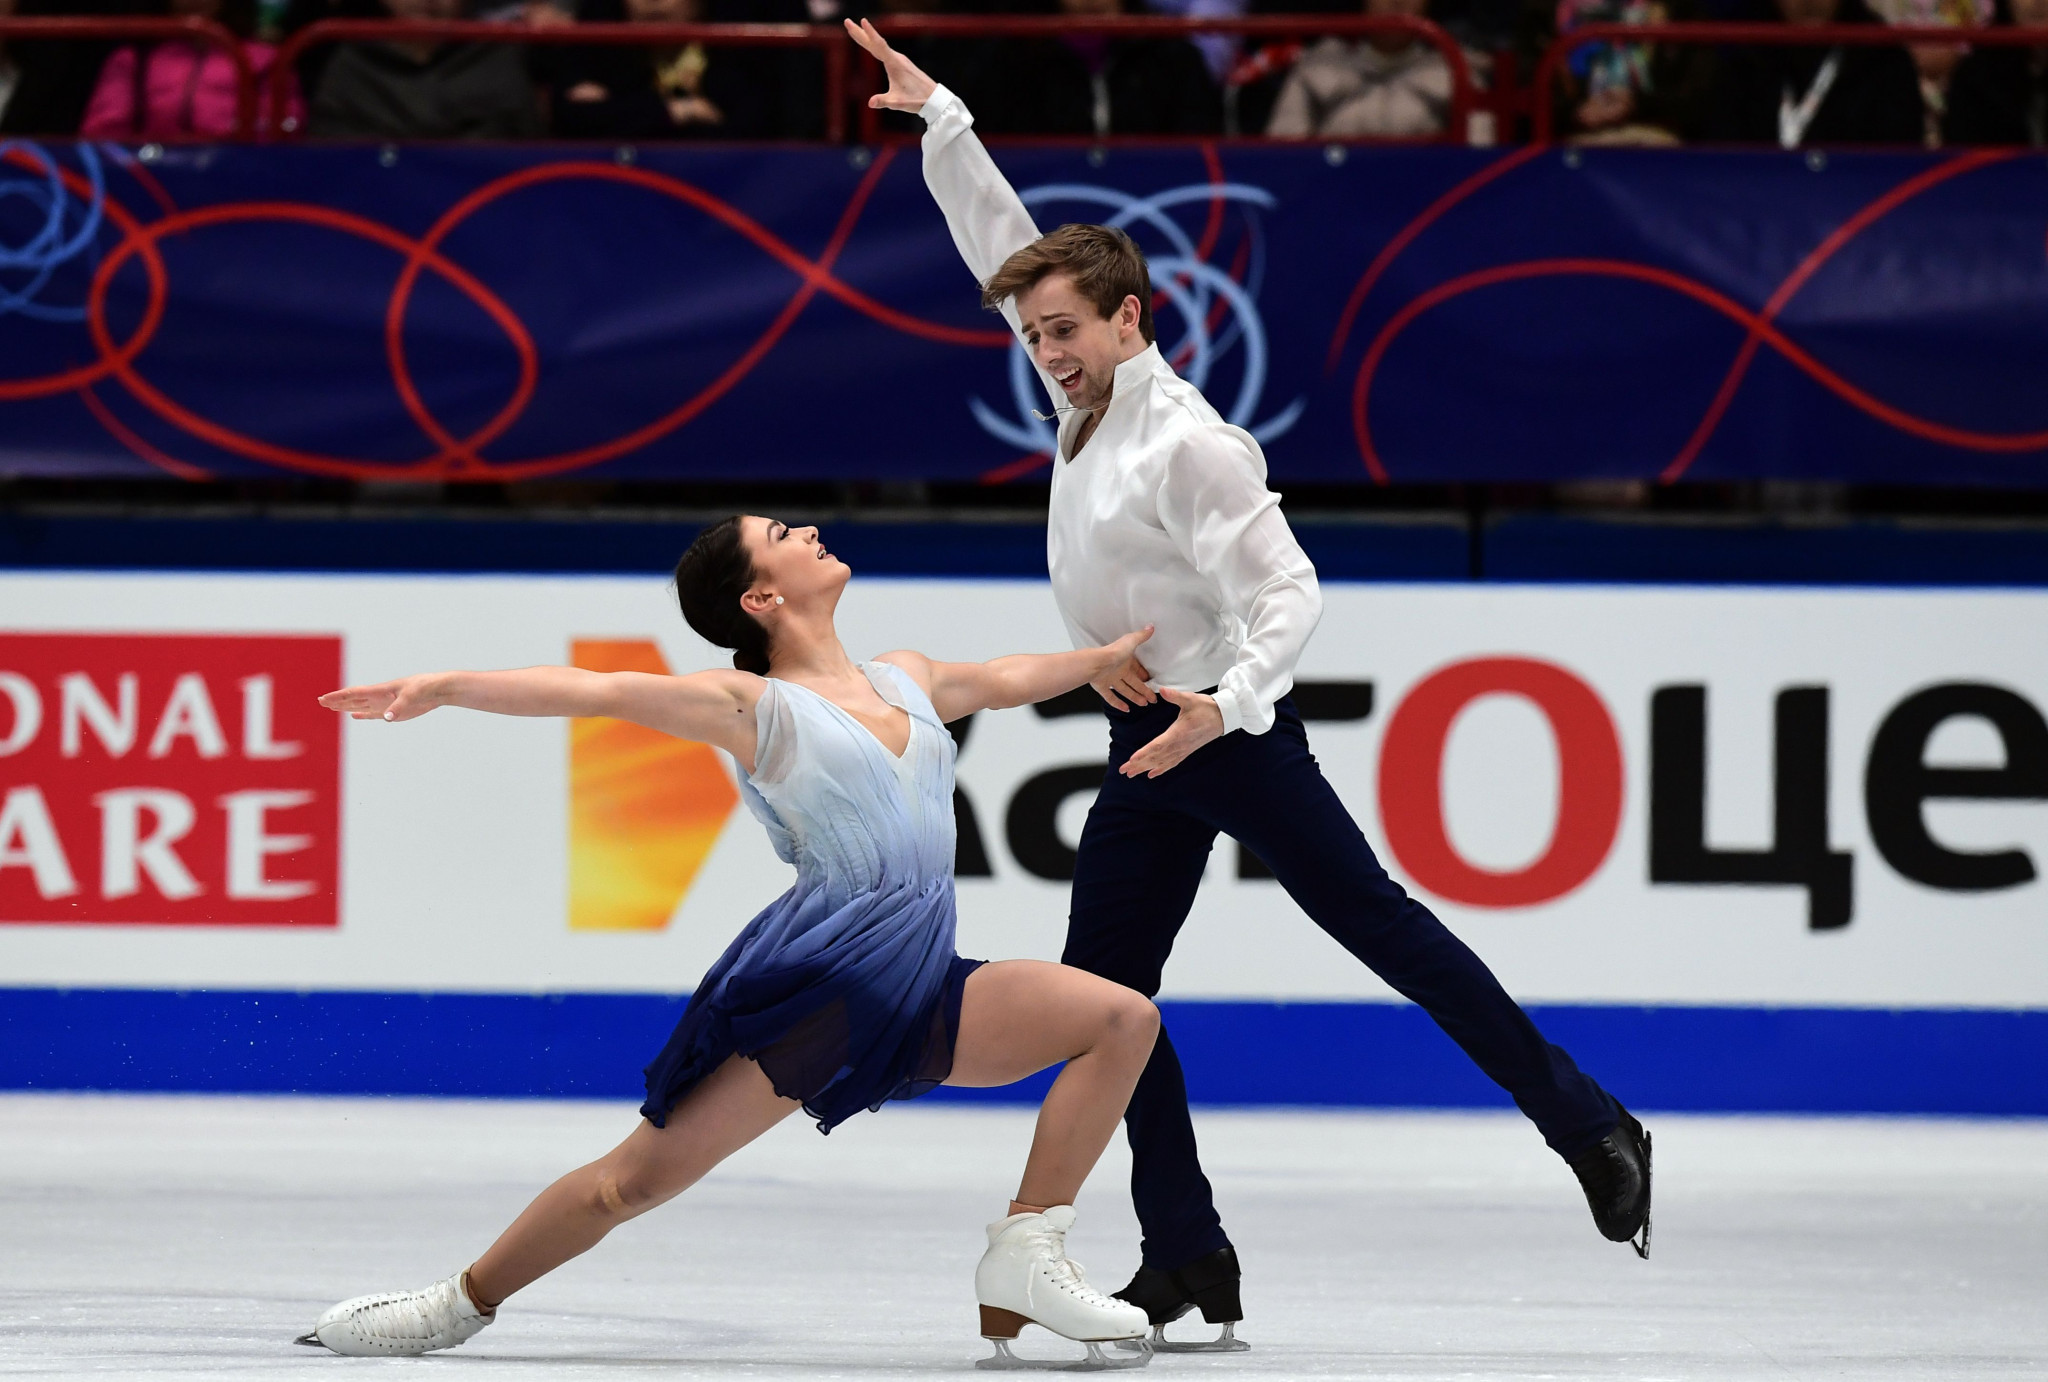 Kaitlin Hawayek and Jean-Luc Baker of United States won the Four Continents Ice Dancing title  this year in Taipei ©Getty Images